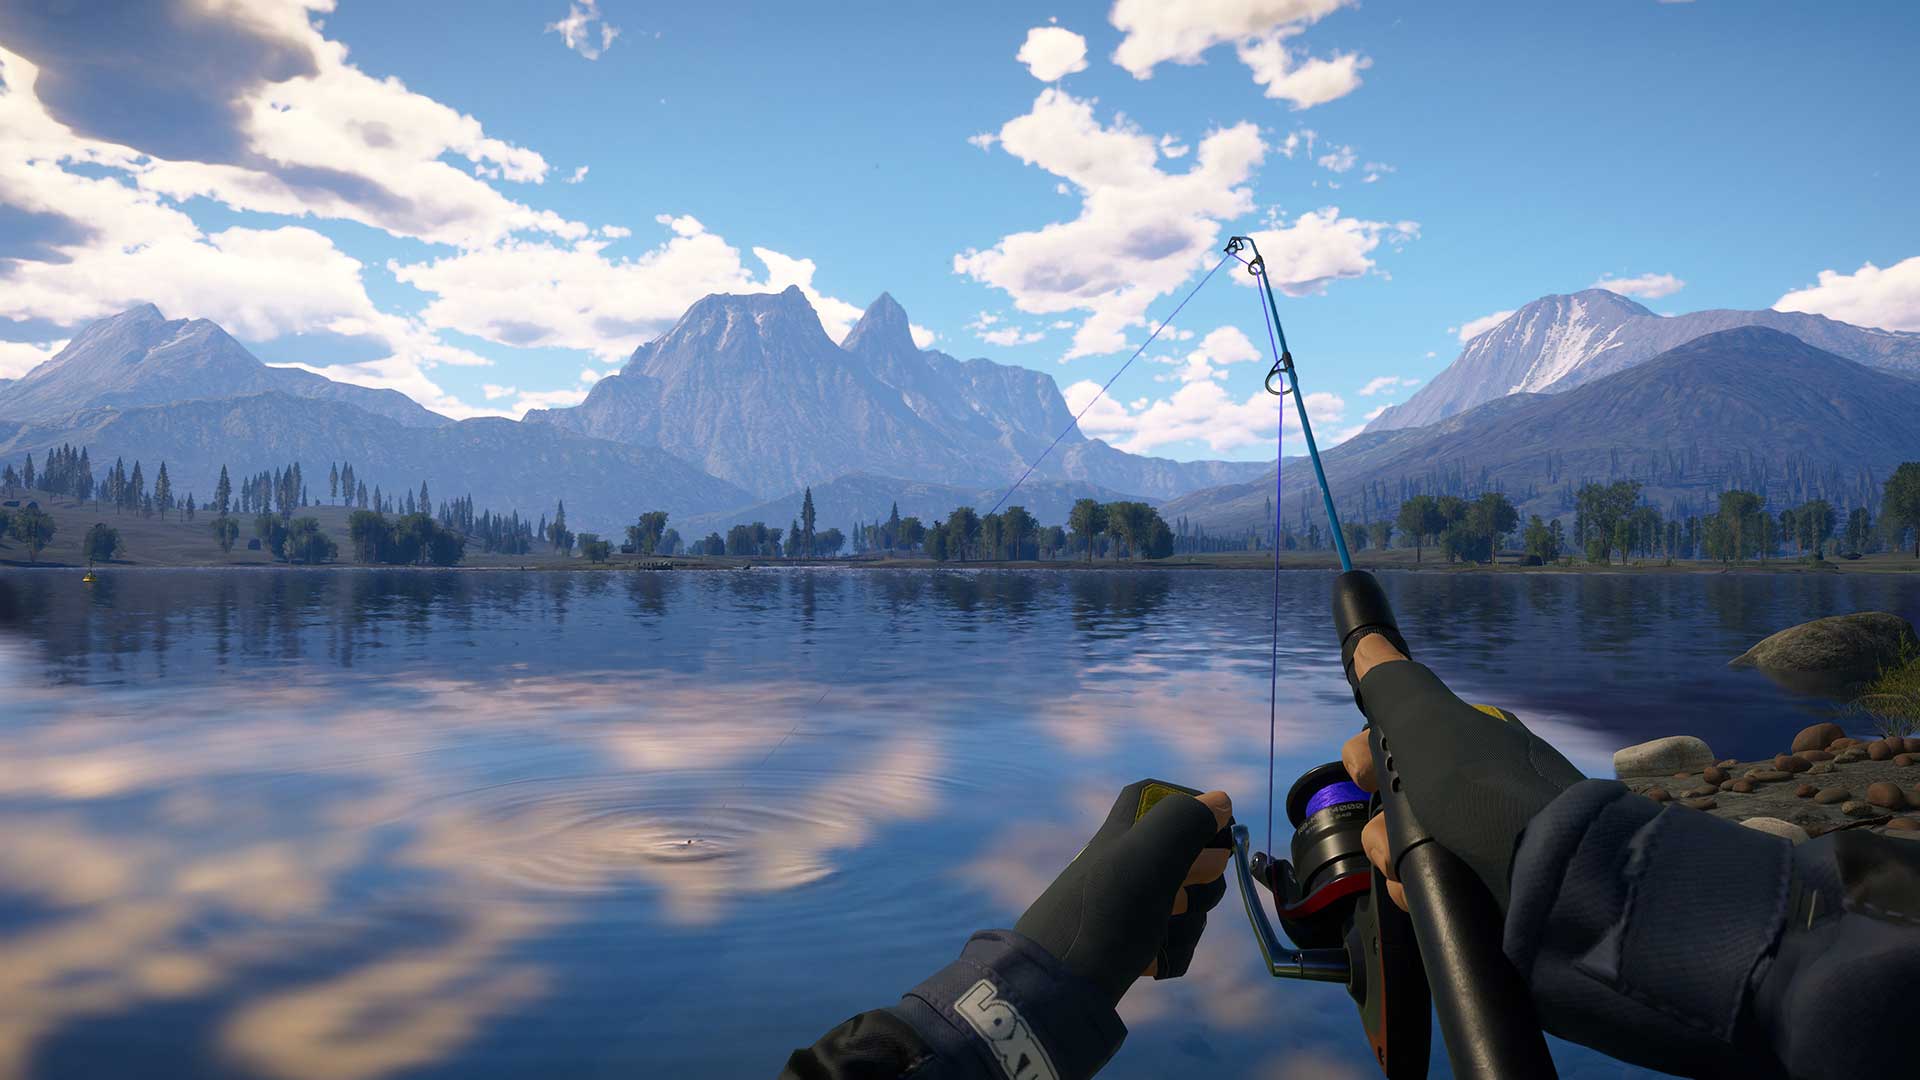 Call of the Wild: The Angler lets you fish with friends in an open